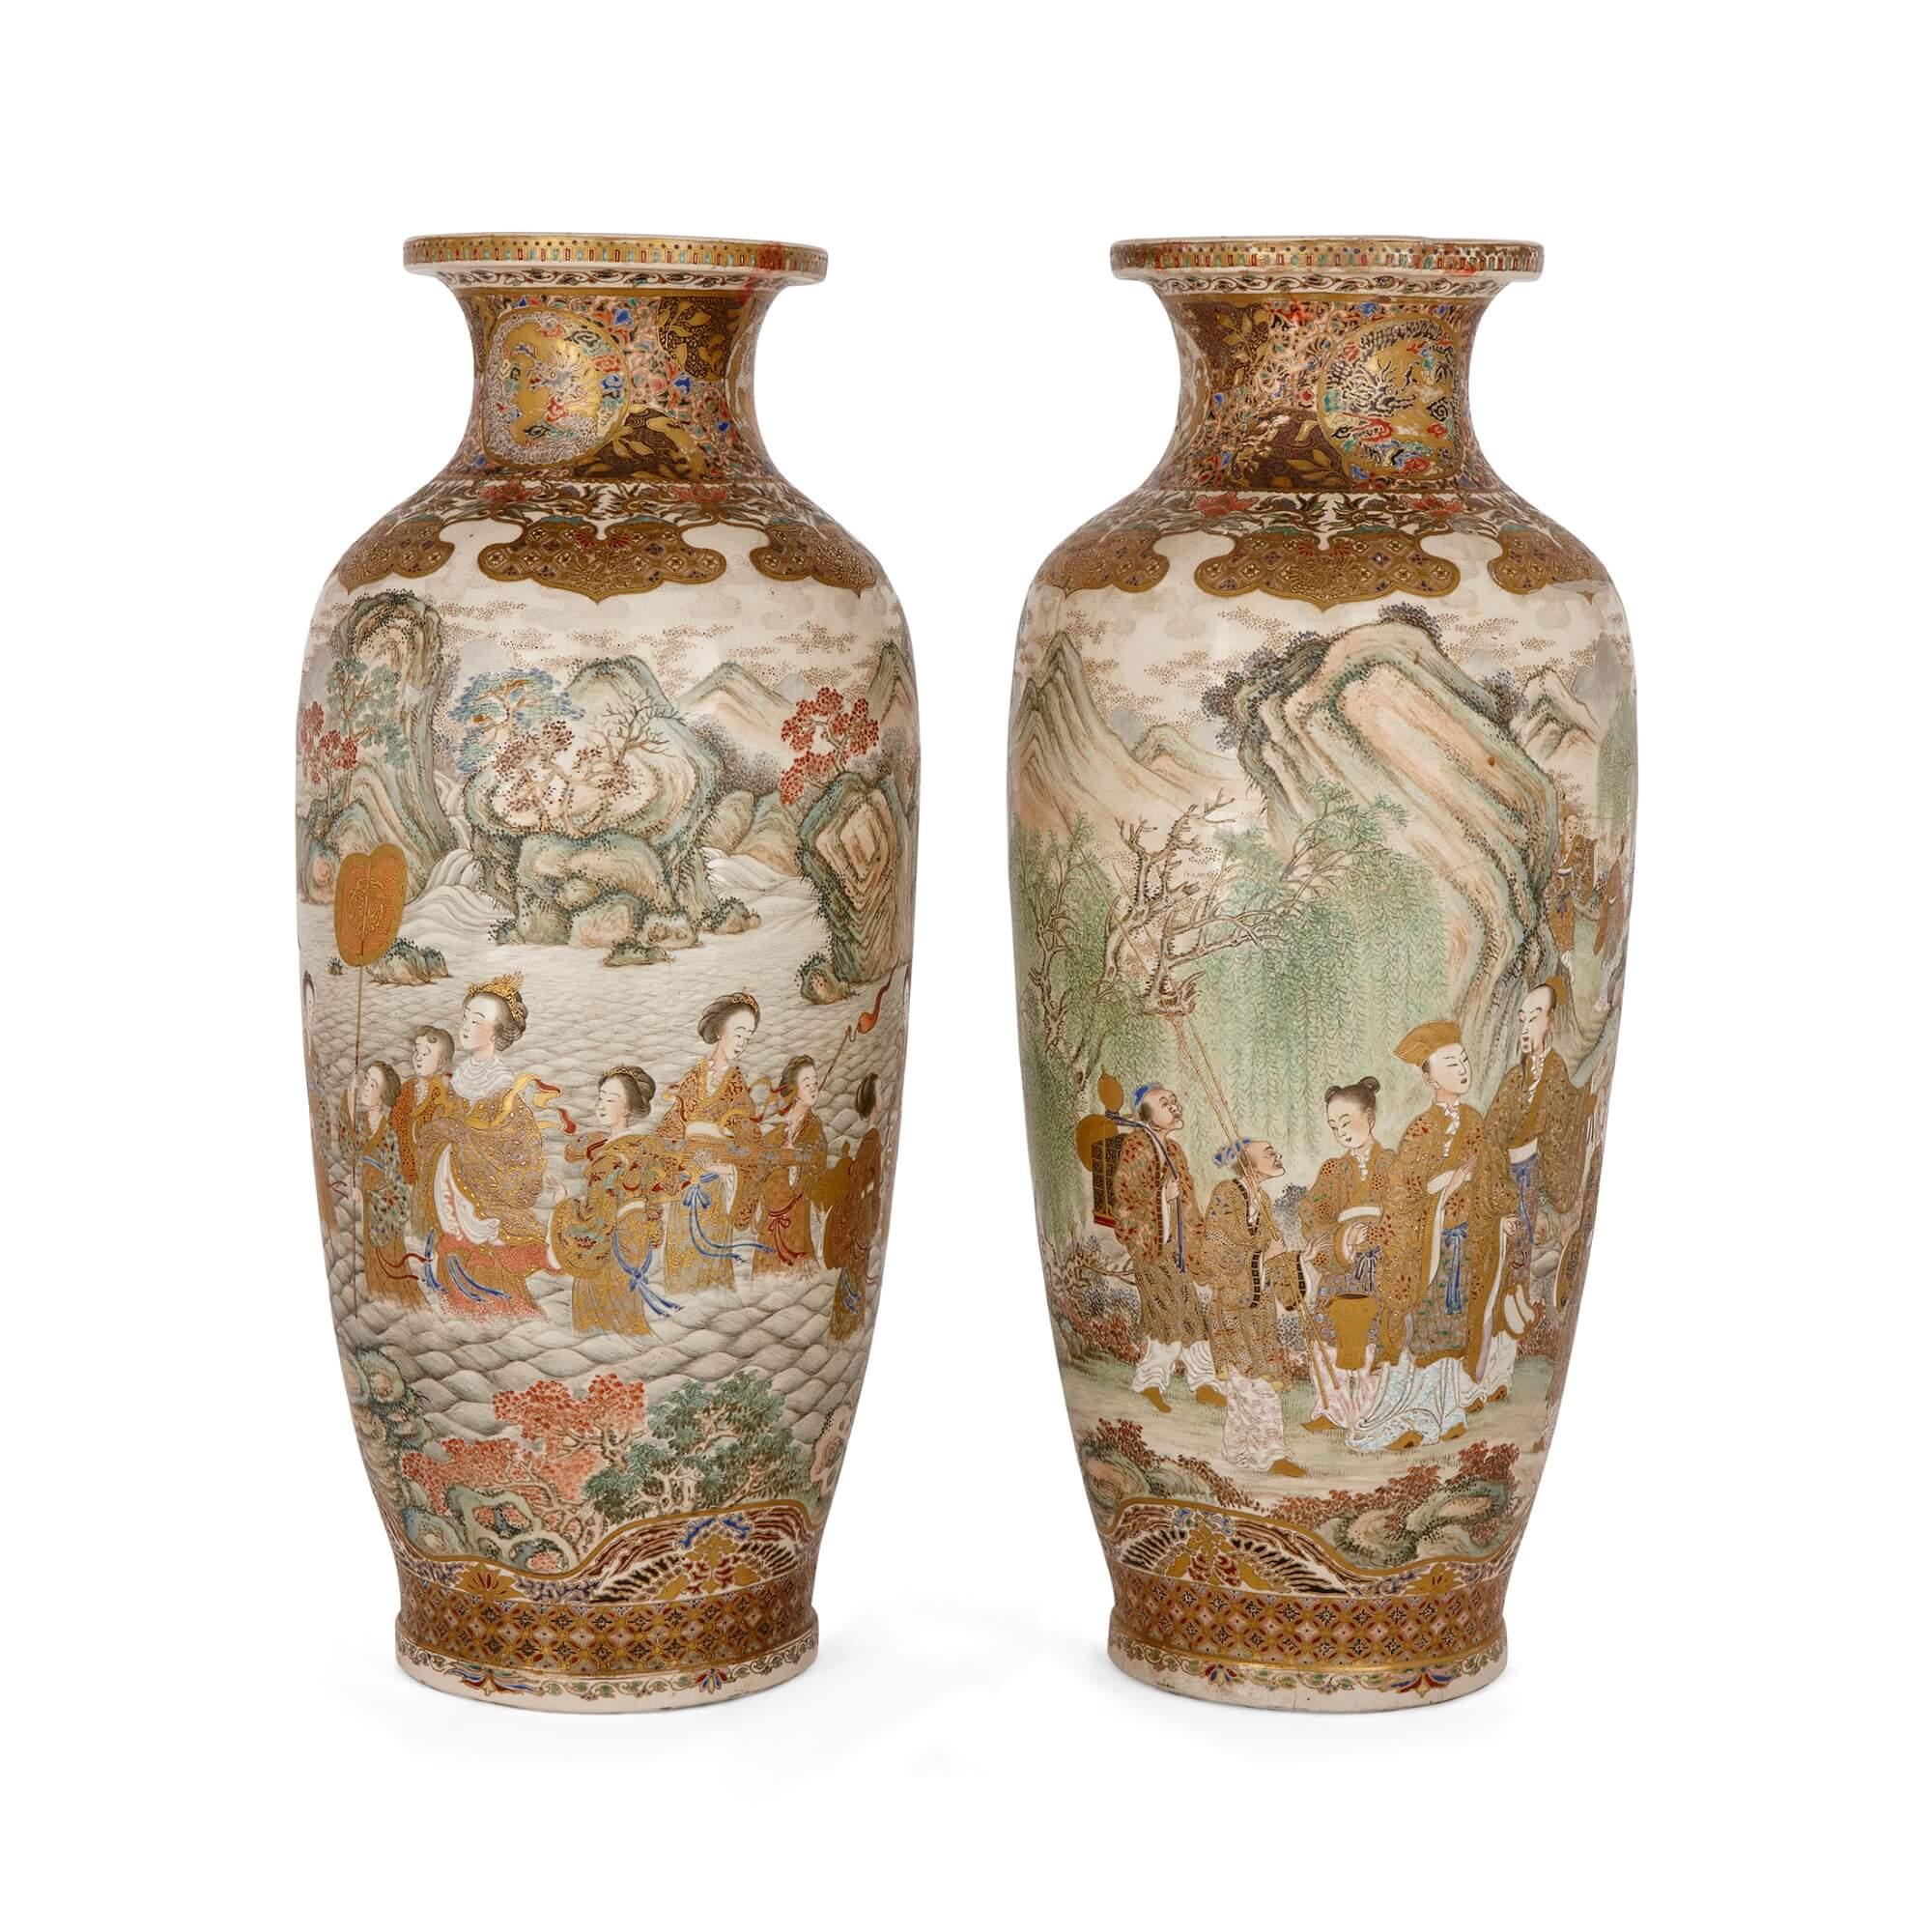 A pair of large Meiji period Satsuma Rouleau vases
Japanese, Late 19th Century
Height 54.5cm, diameter 24cm

These beautiful Satsuma-ware vases were made during the Meiji period, in this distinctive and wonderful style, and in Rouleau vase form.